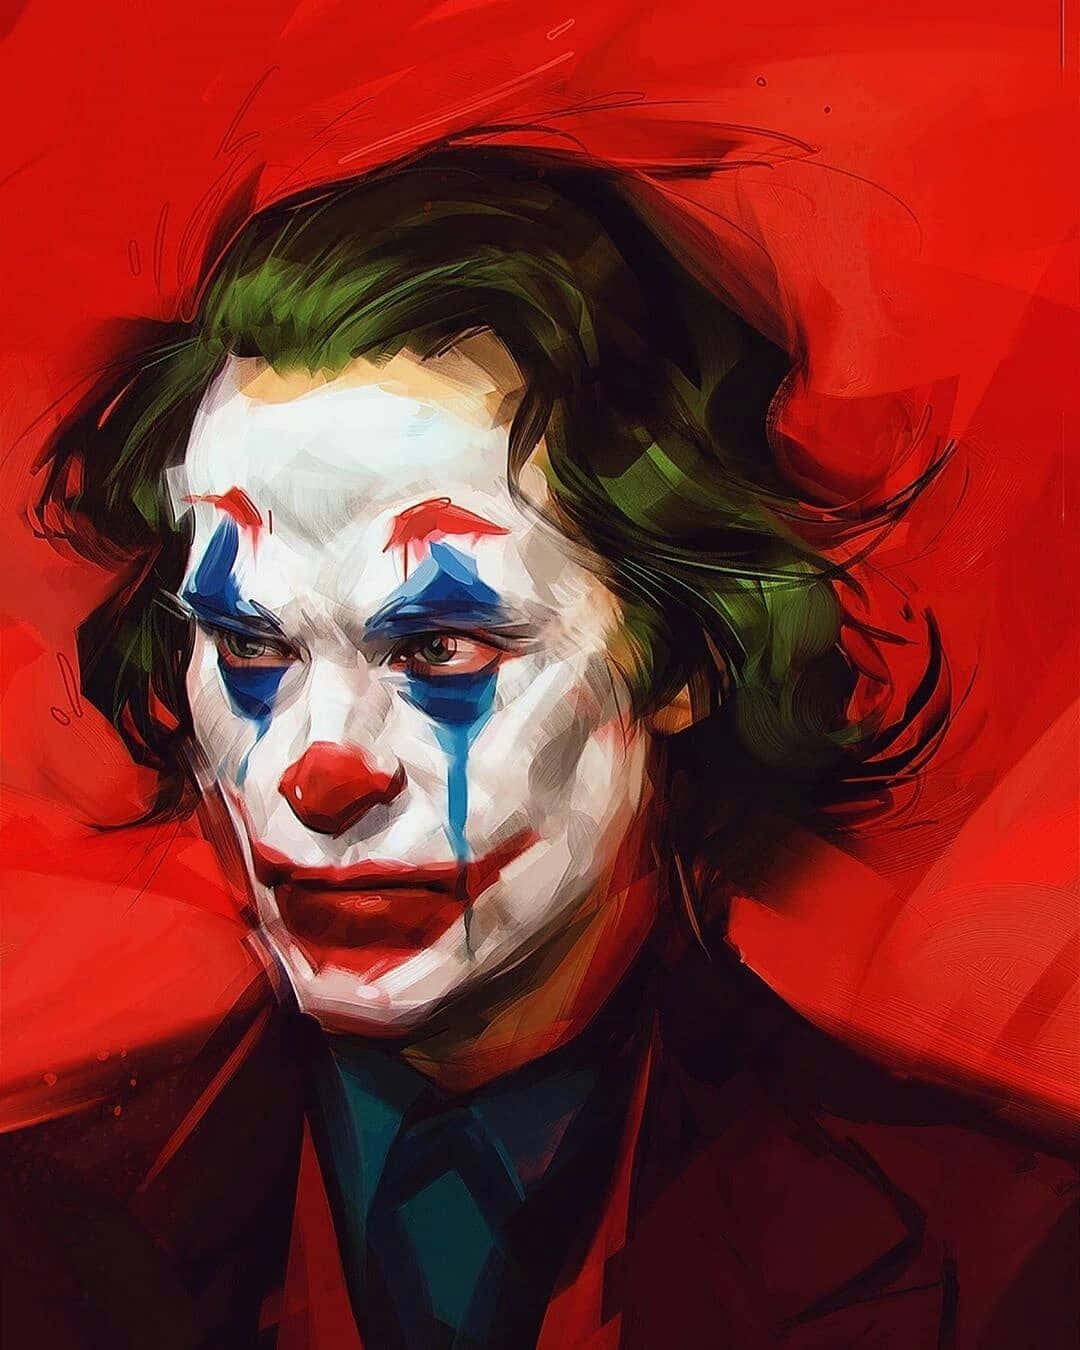 Expressive Joker Painting Depicting Chaos and Madness Wallpaper